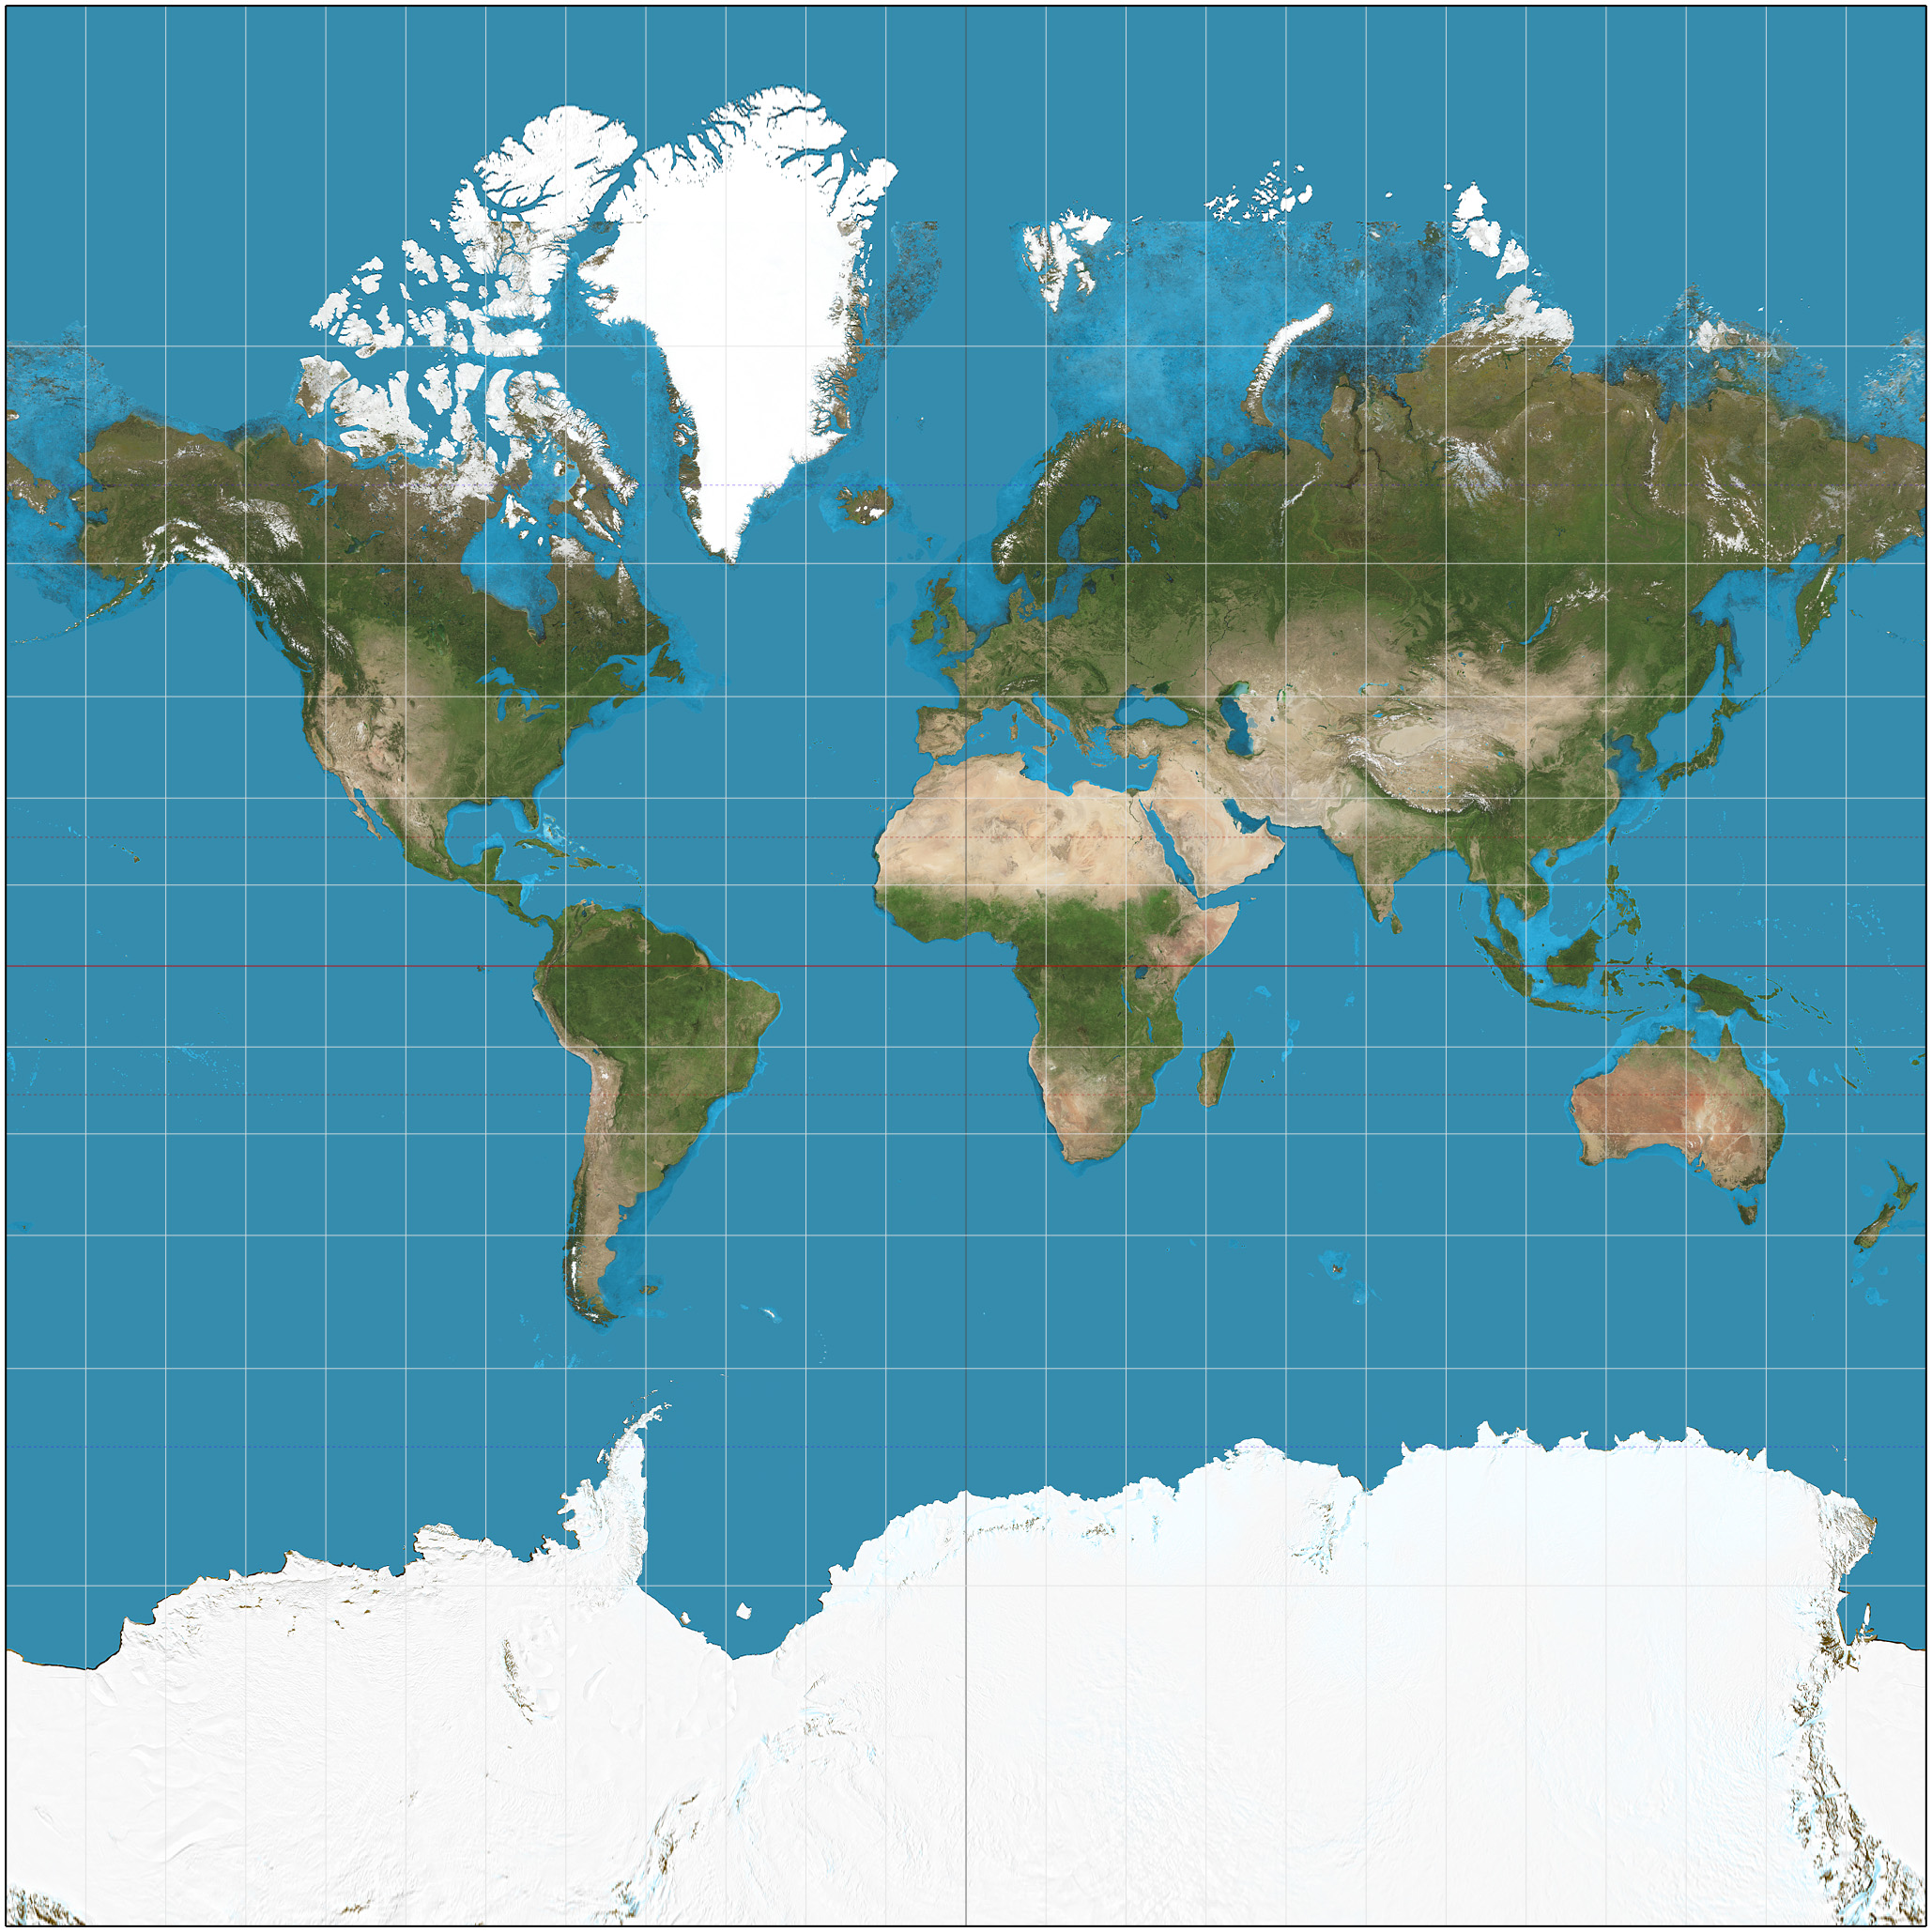 Pros and Cons of Mercator Projection